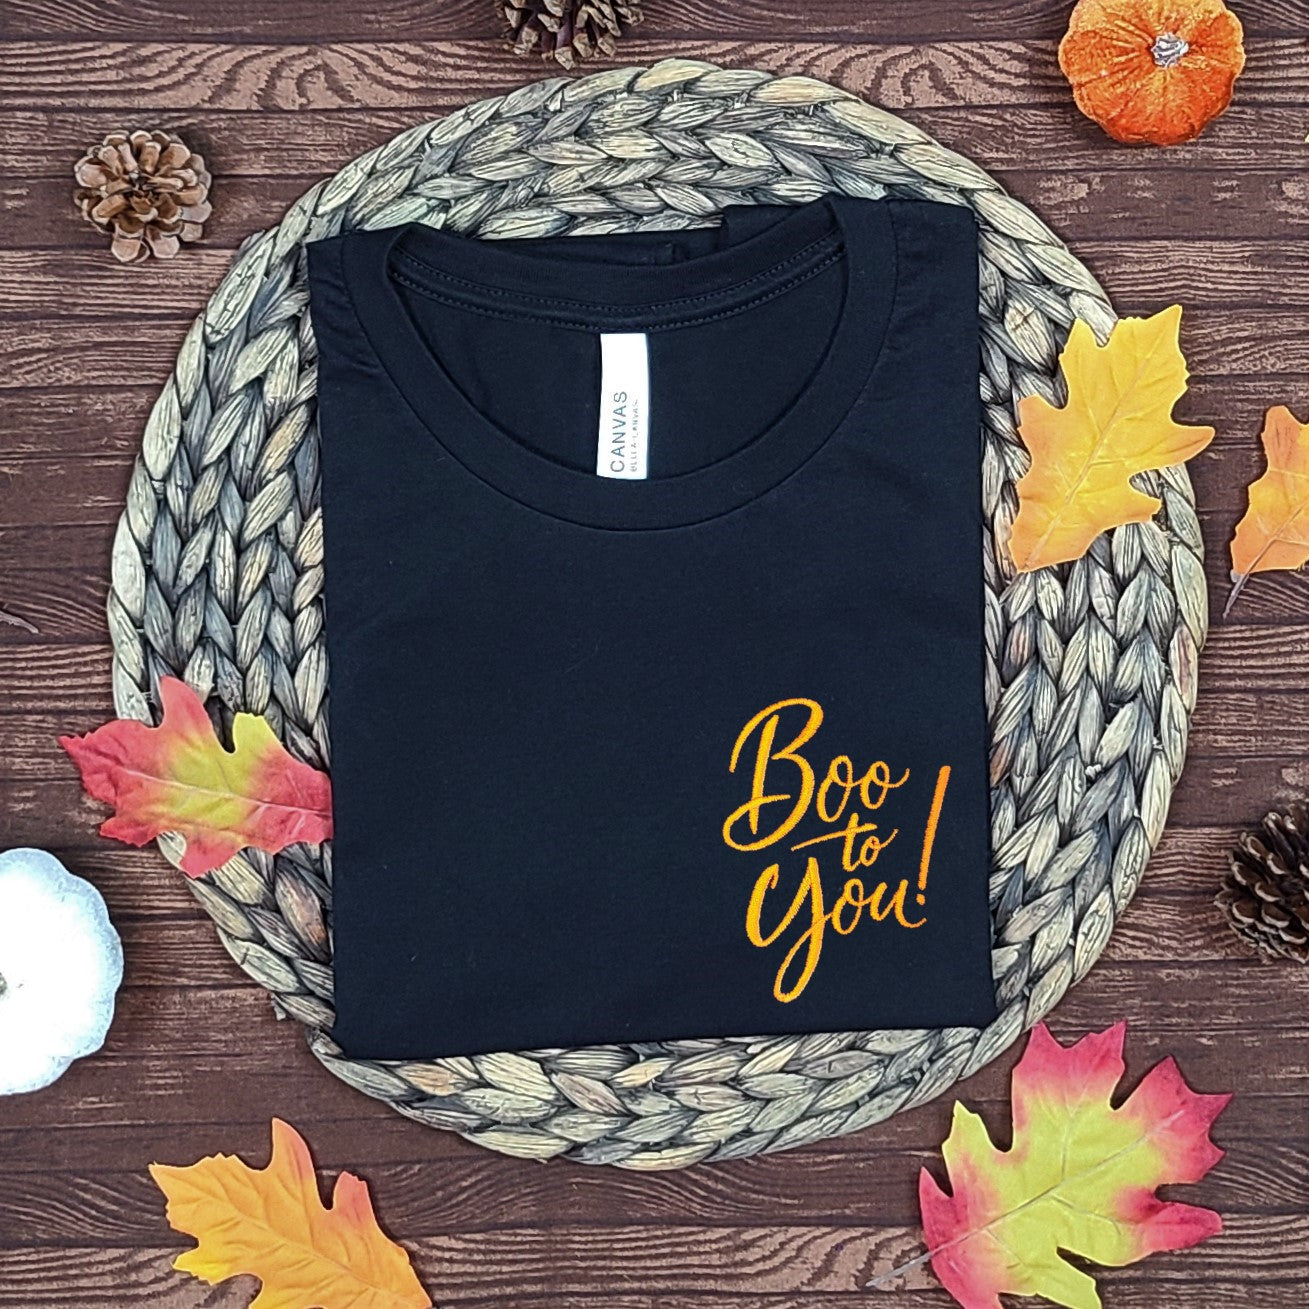 Boo To You! Black Embroidered Tee